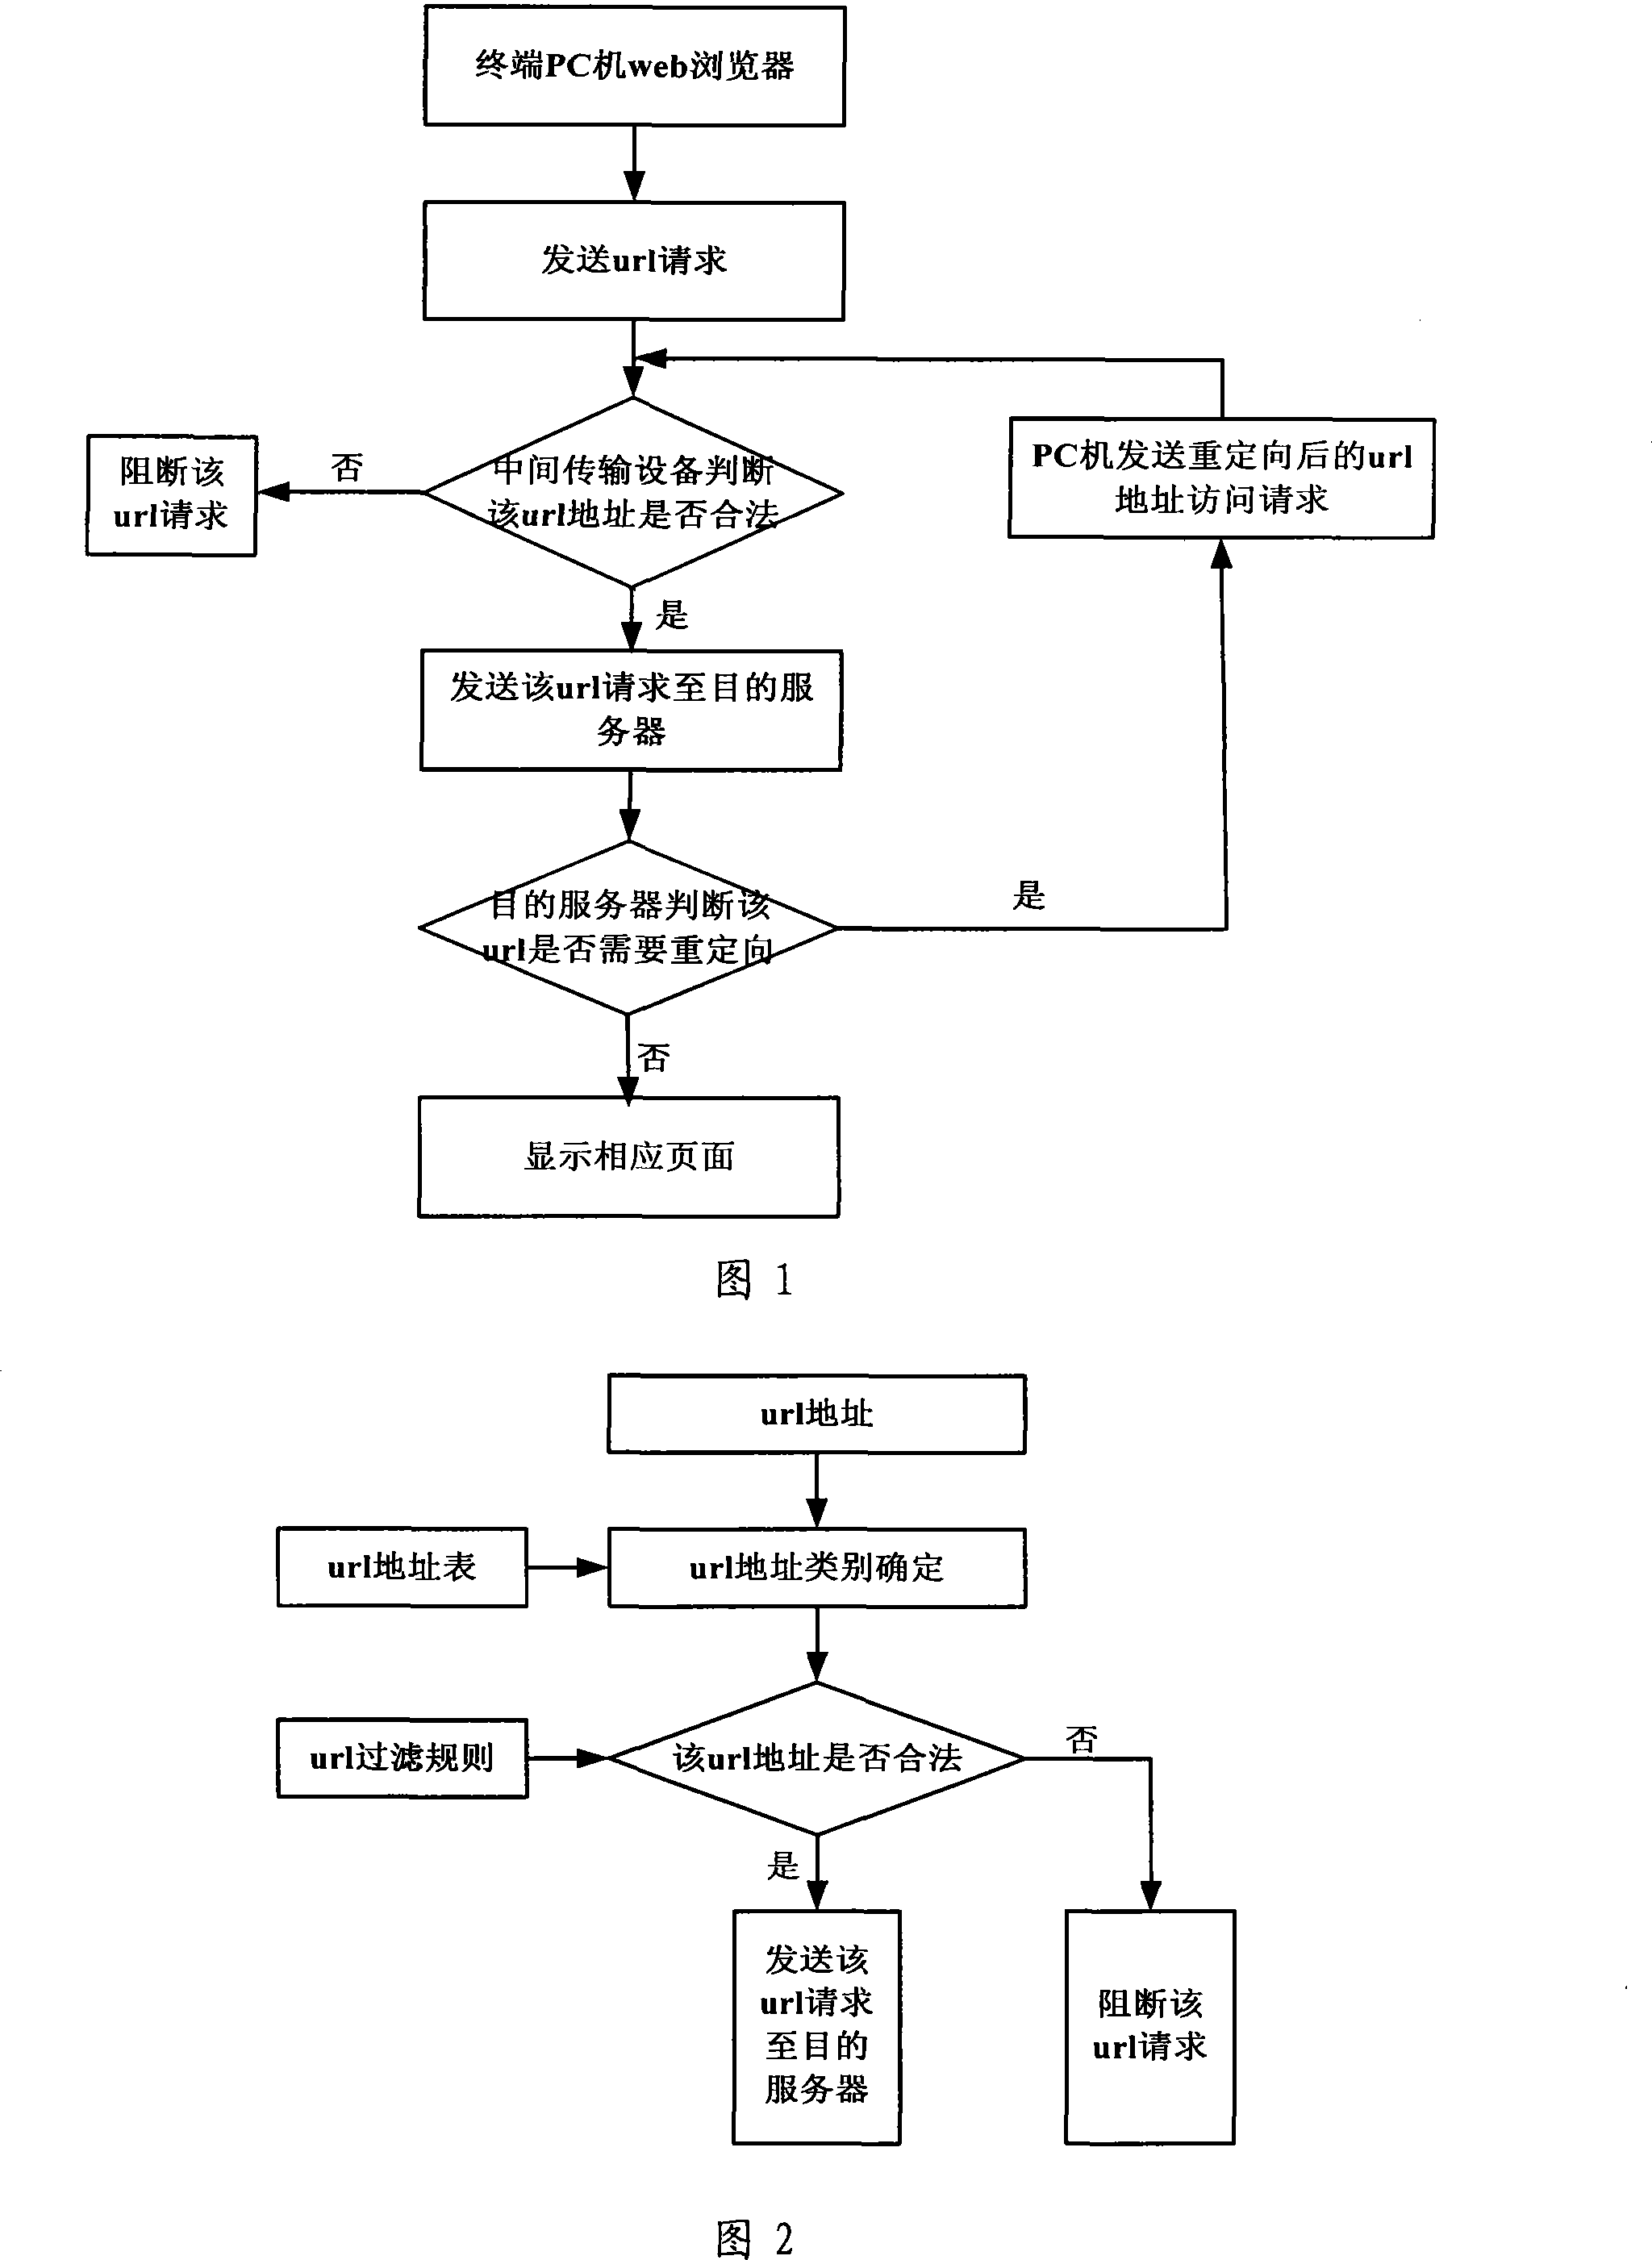 United resource localizer address filtering method and intermediate transmission equipment